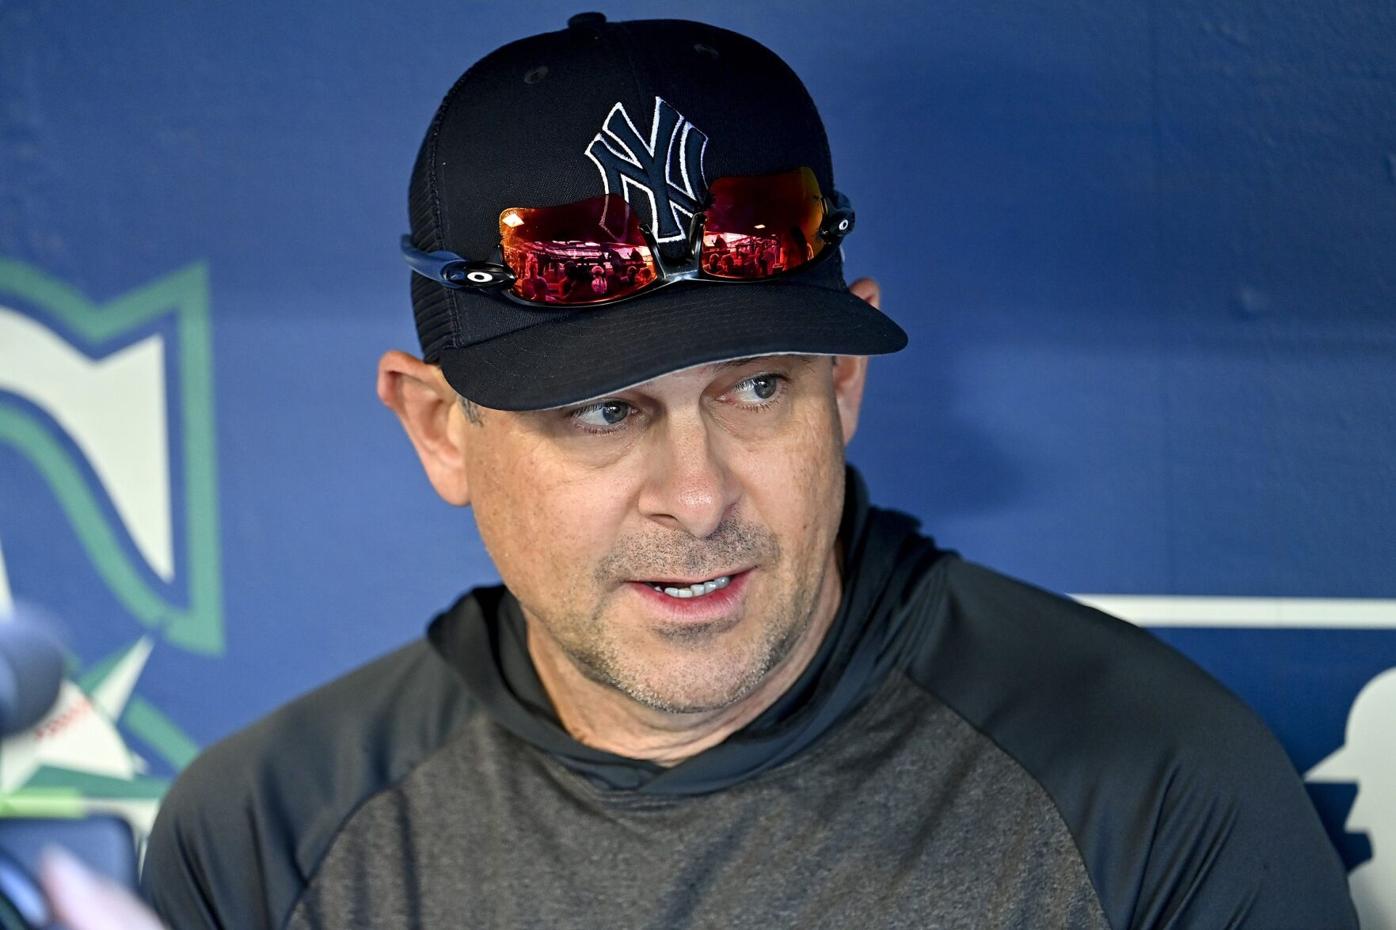 New York fans enraged with Aaron Boone's management as Mariners